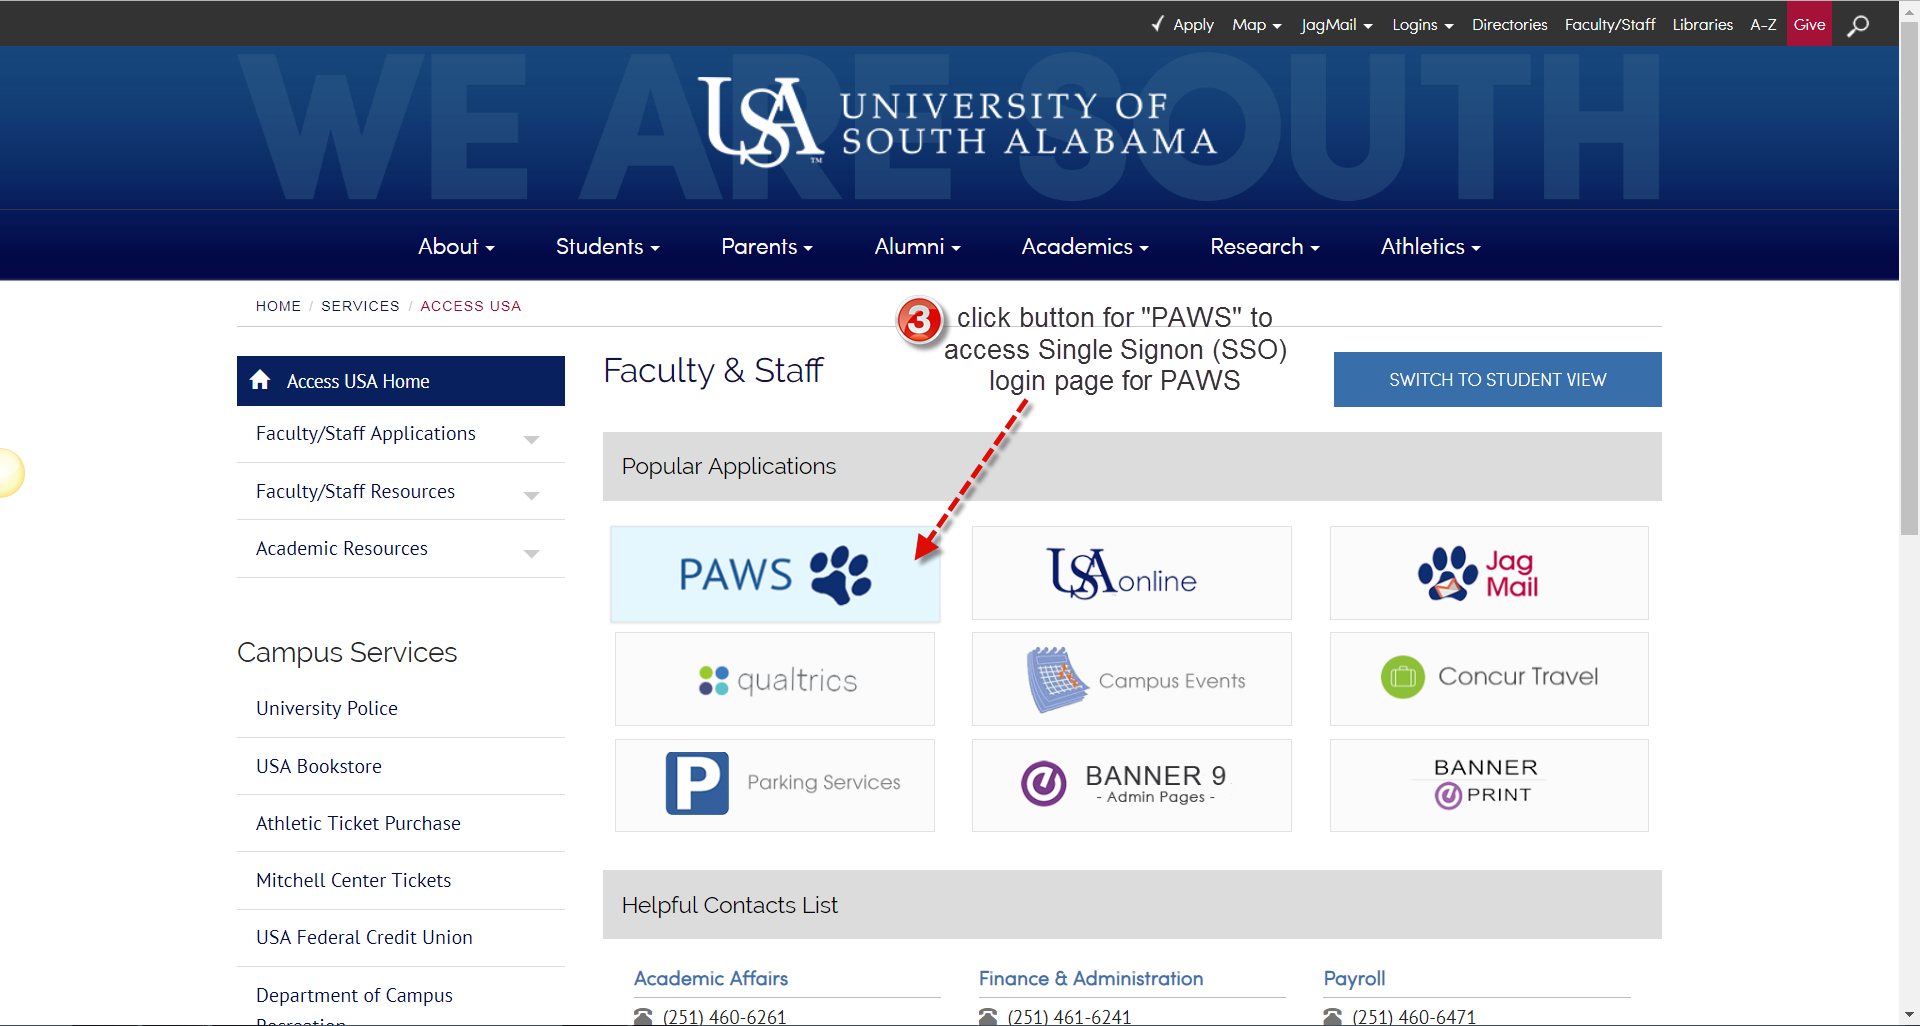 Access USA with PAWS button highlighted